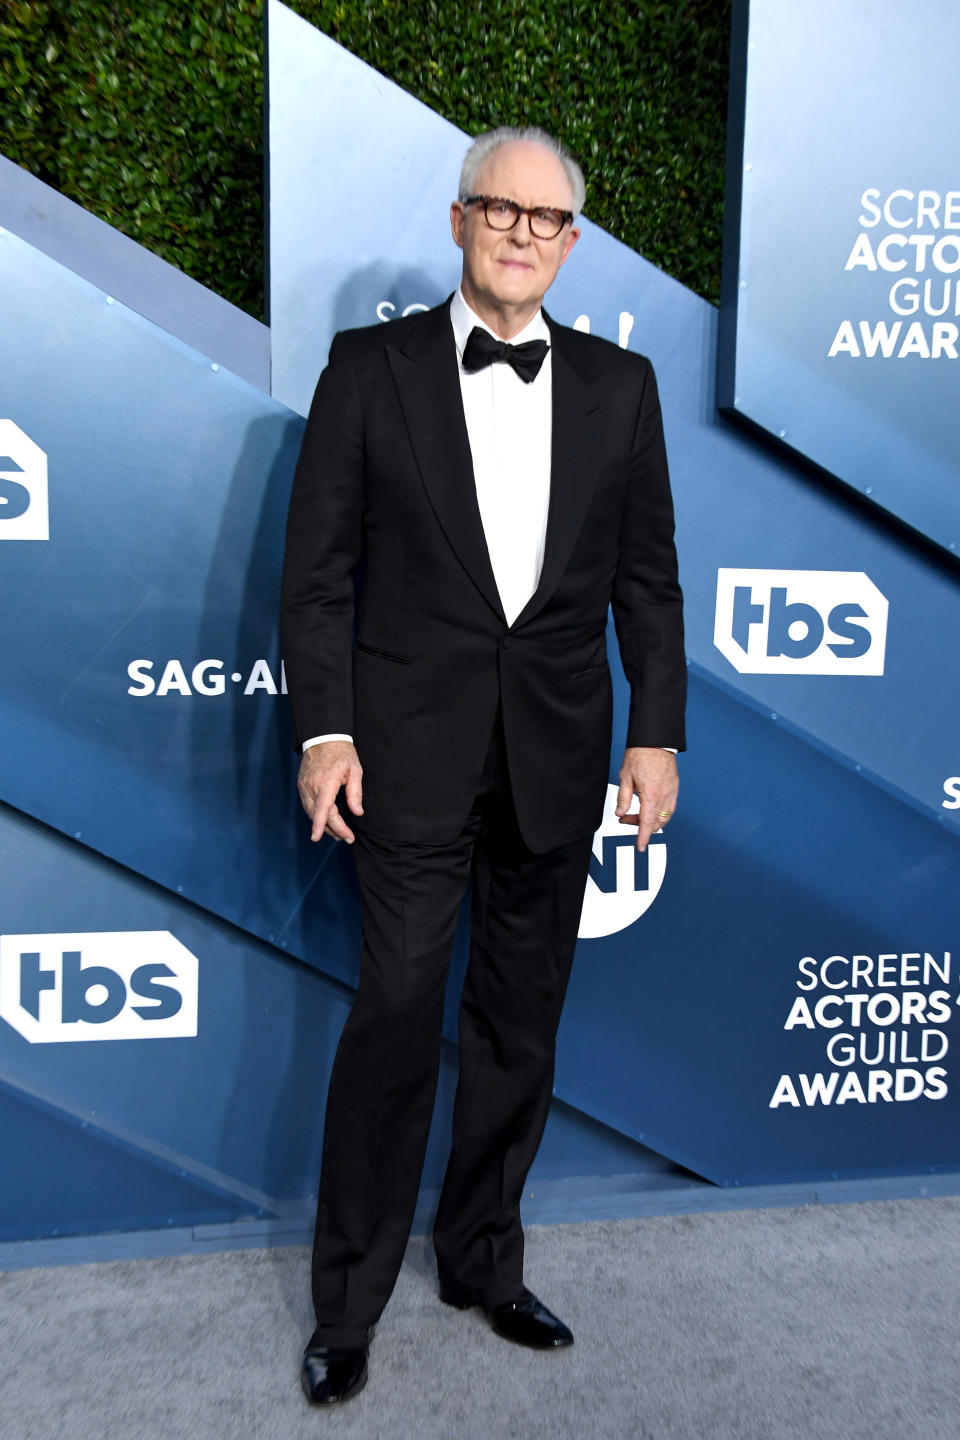 LOS ANGELES, CALIFORNIA - JANUARY 19: John Lithgow attends the 26th Annual Screen Actors Guild Awards at The Shrine Auditorium on January 19, 2020 in Los Angeles, California. (Photo by Jon Kopaloff/Getty Images)